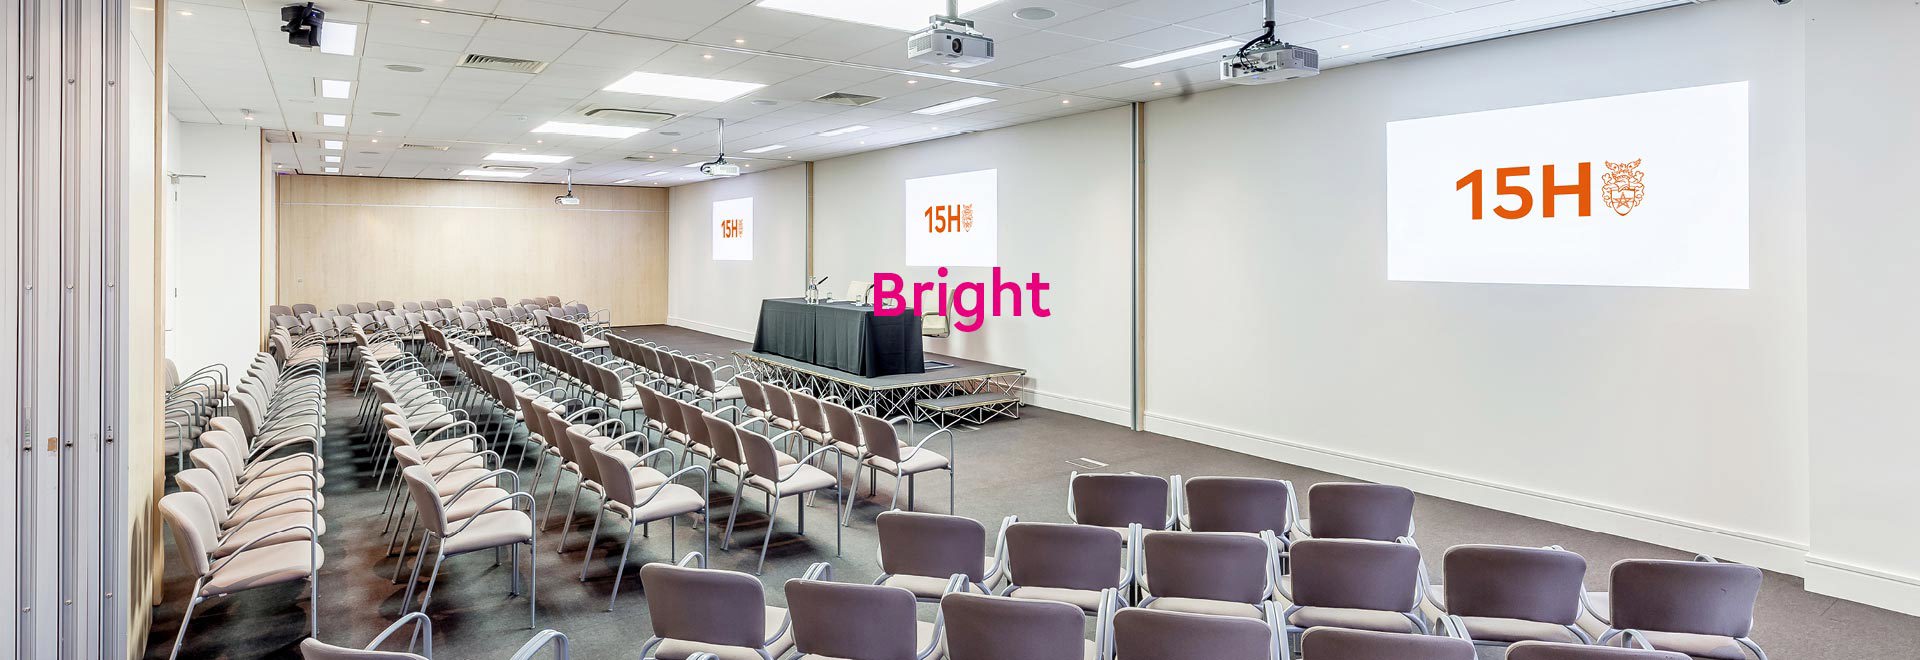 15Hatfields conference room with the word 'Bright'